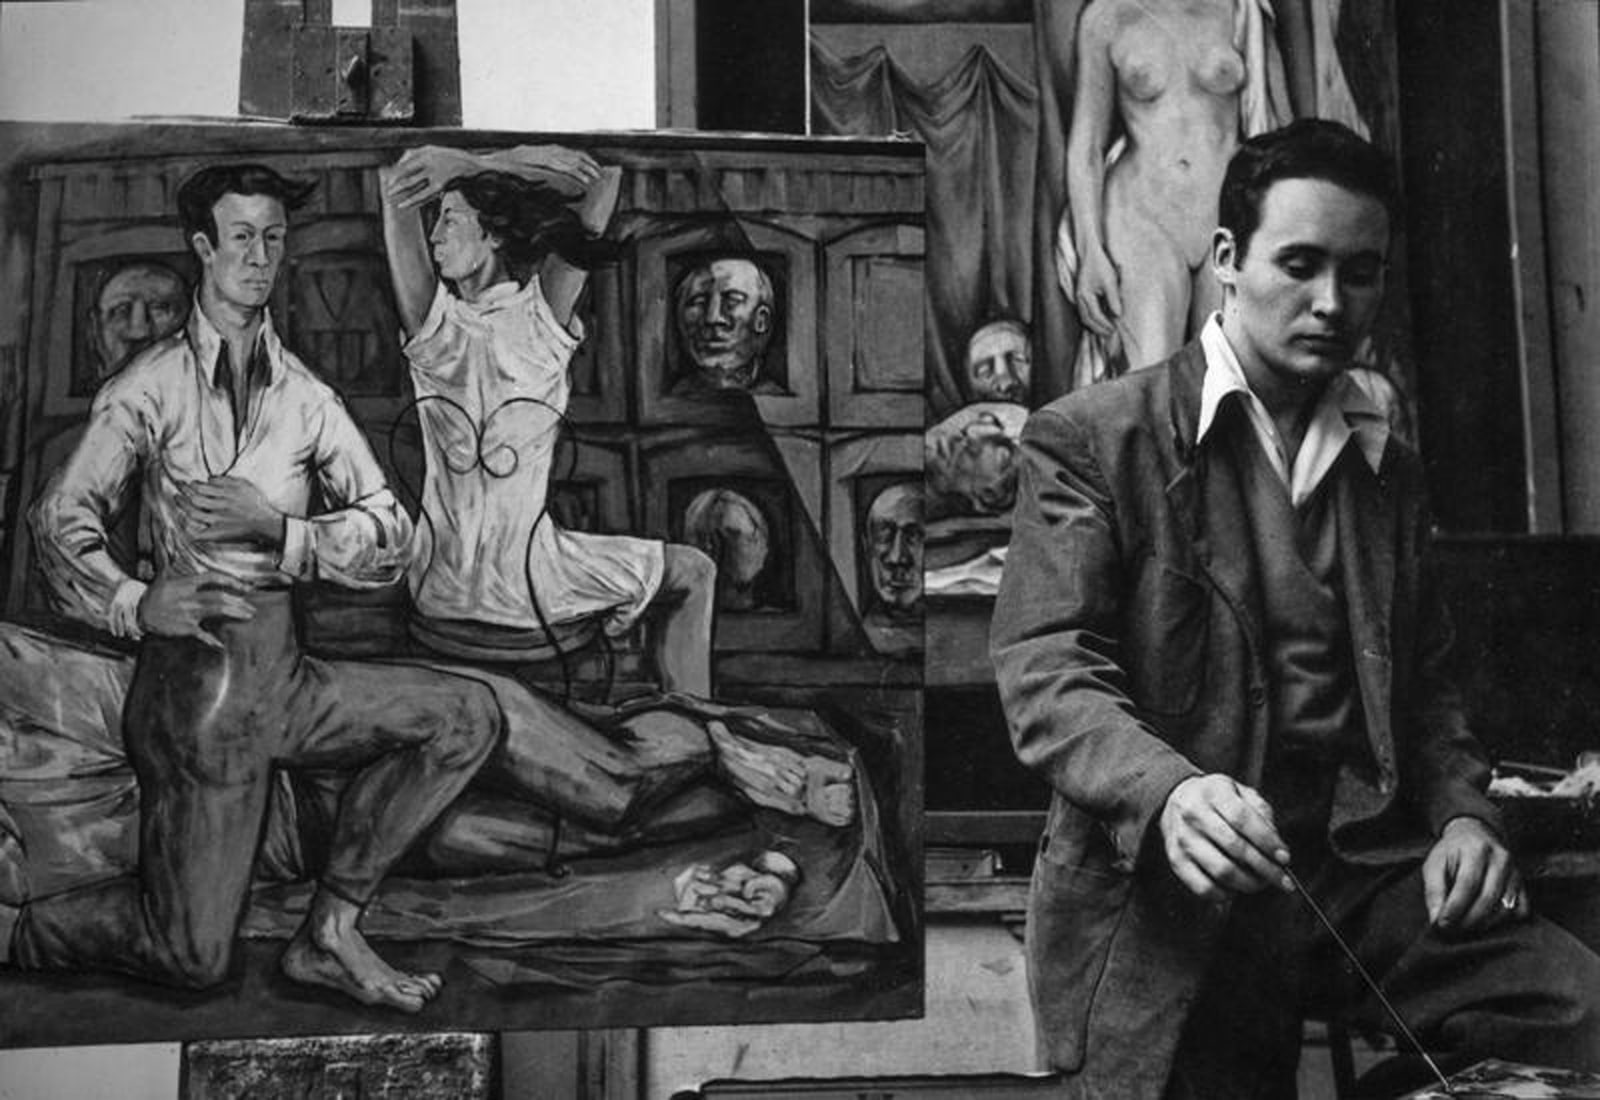 Robert Clark, Chicago, 1953, with the untitled oil painting, featuring a man on one knee and a woman seated in a chair, that helped him to win a Foreign Travelling Fellowship from the Art Institute of Chicago